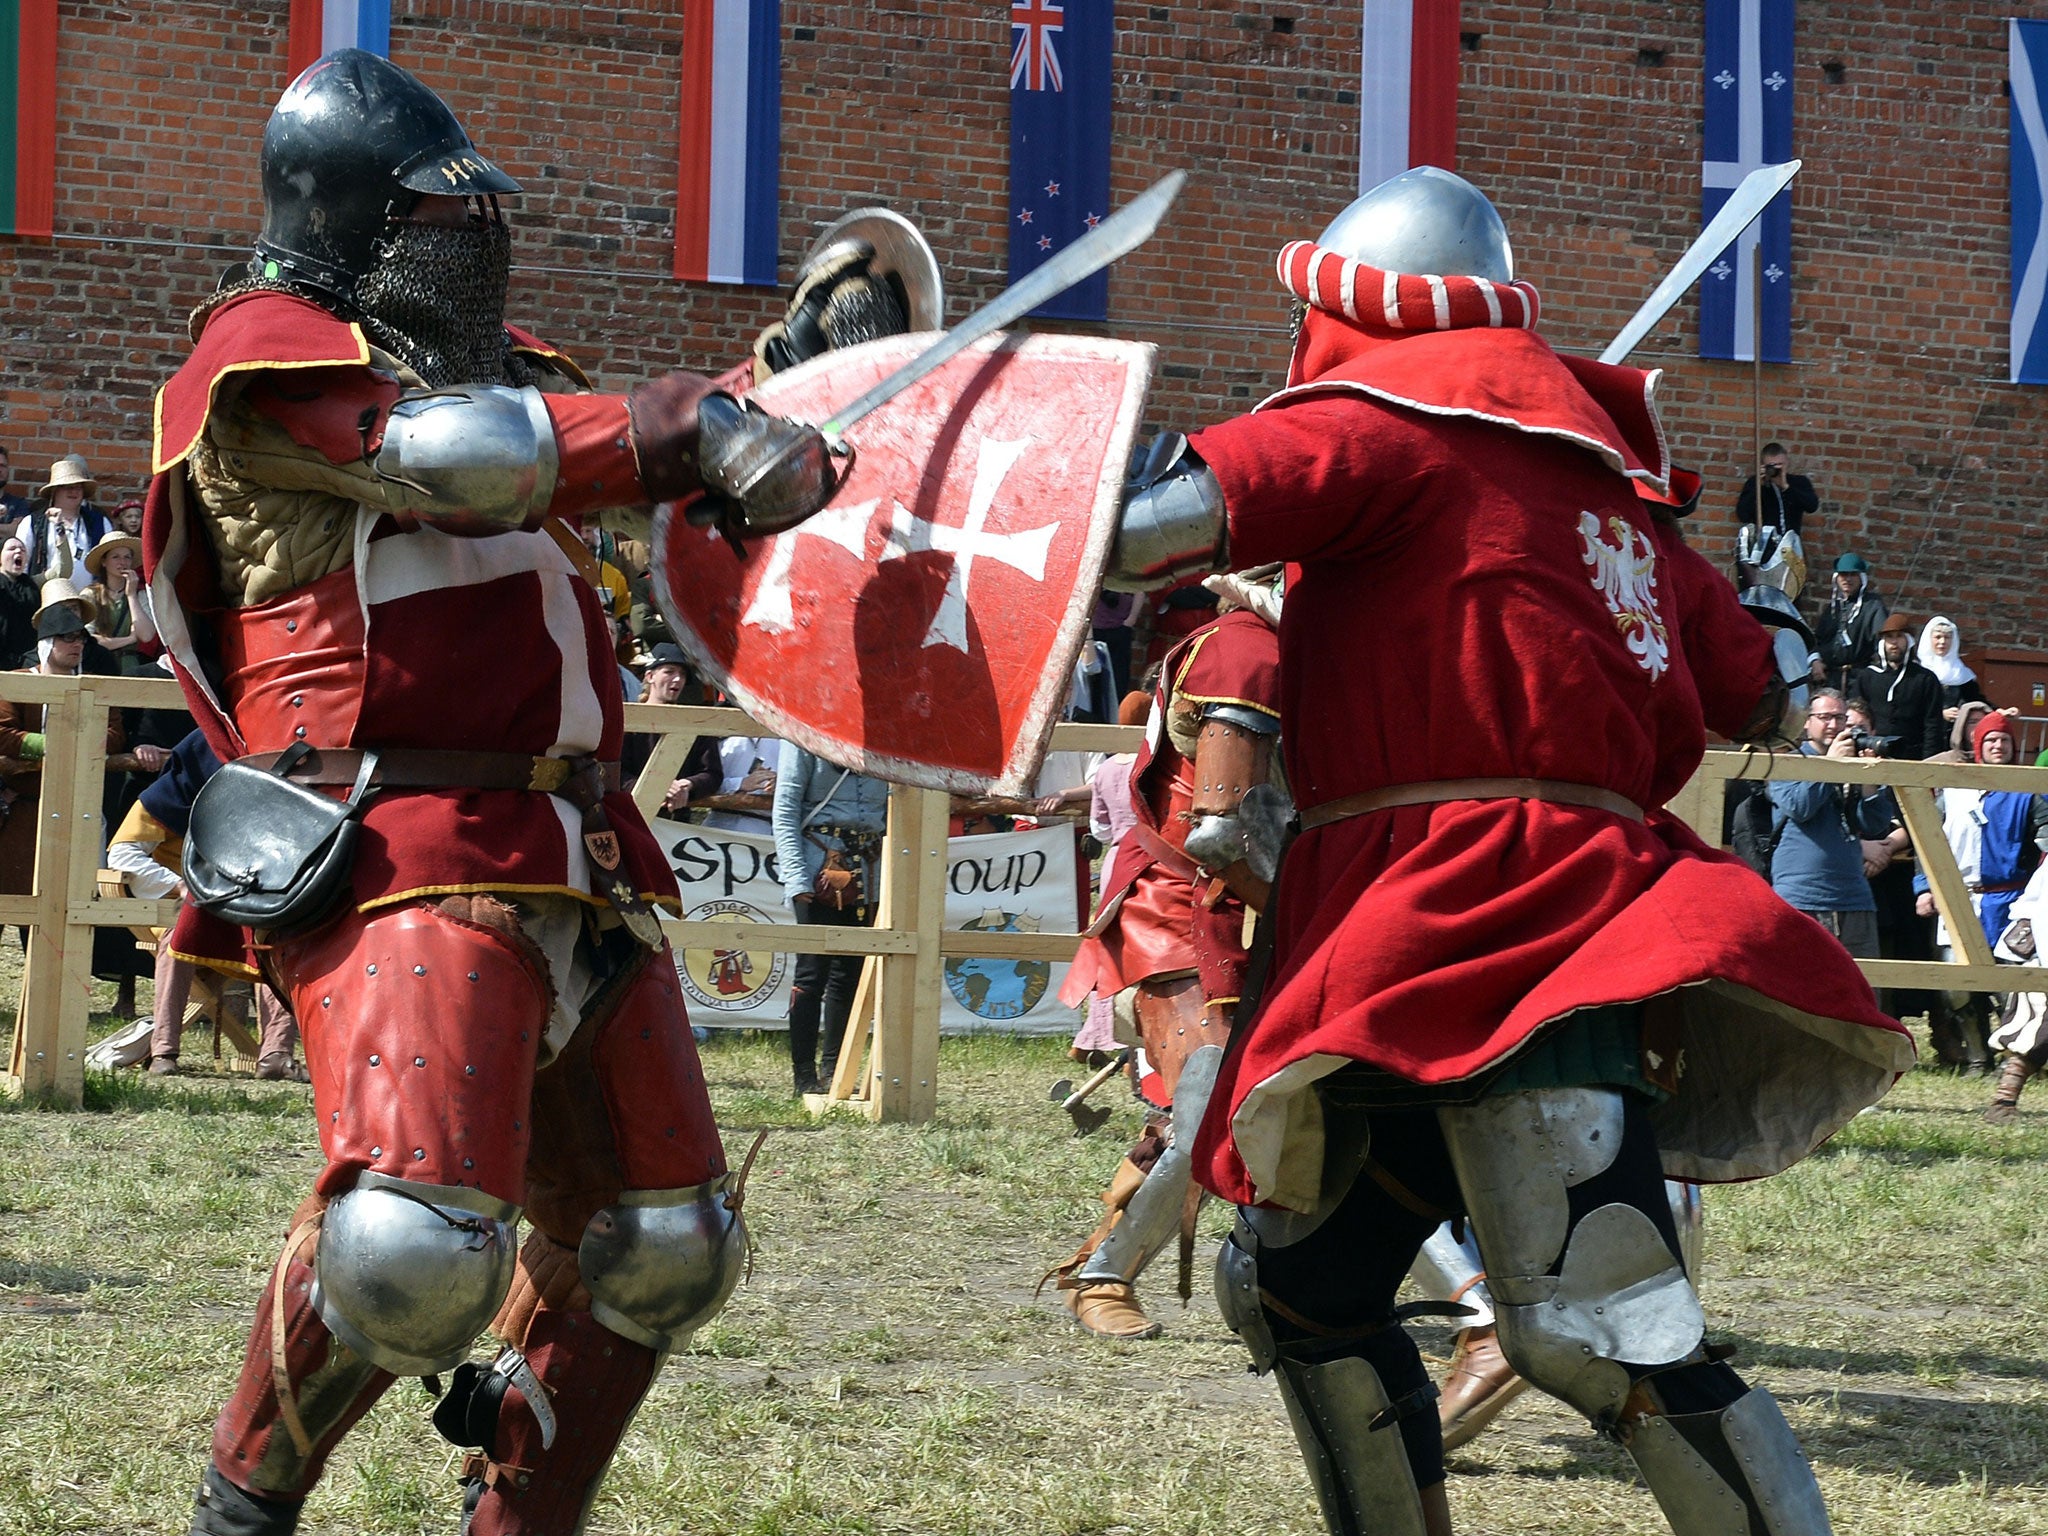 Two Medieval combatants competing at the World Championships at Malbork Castle